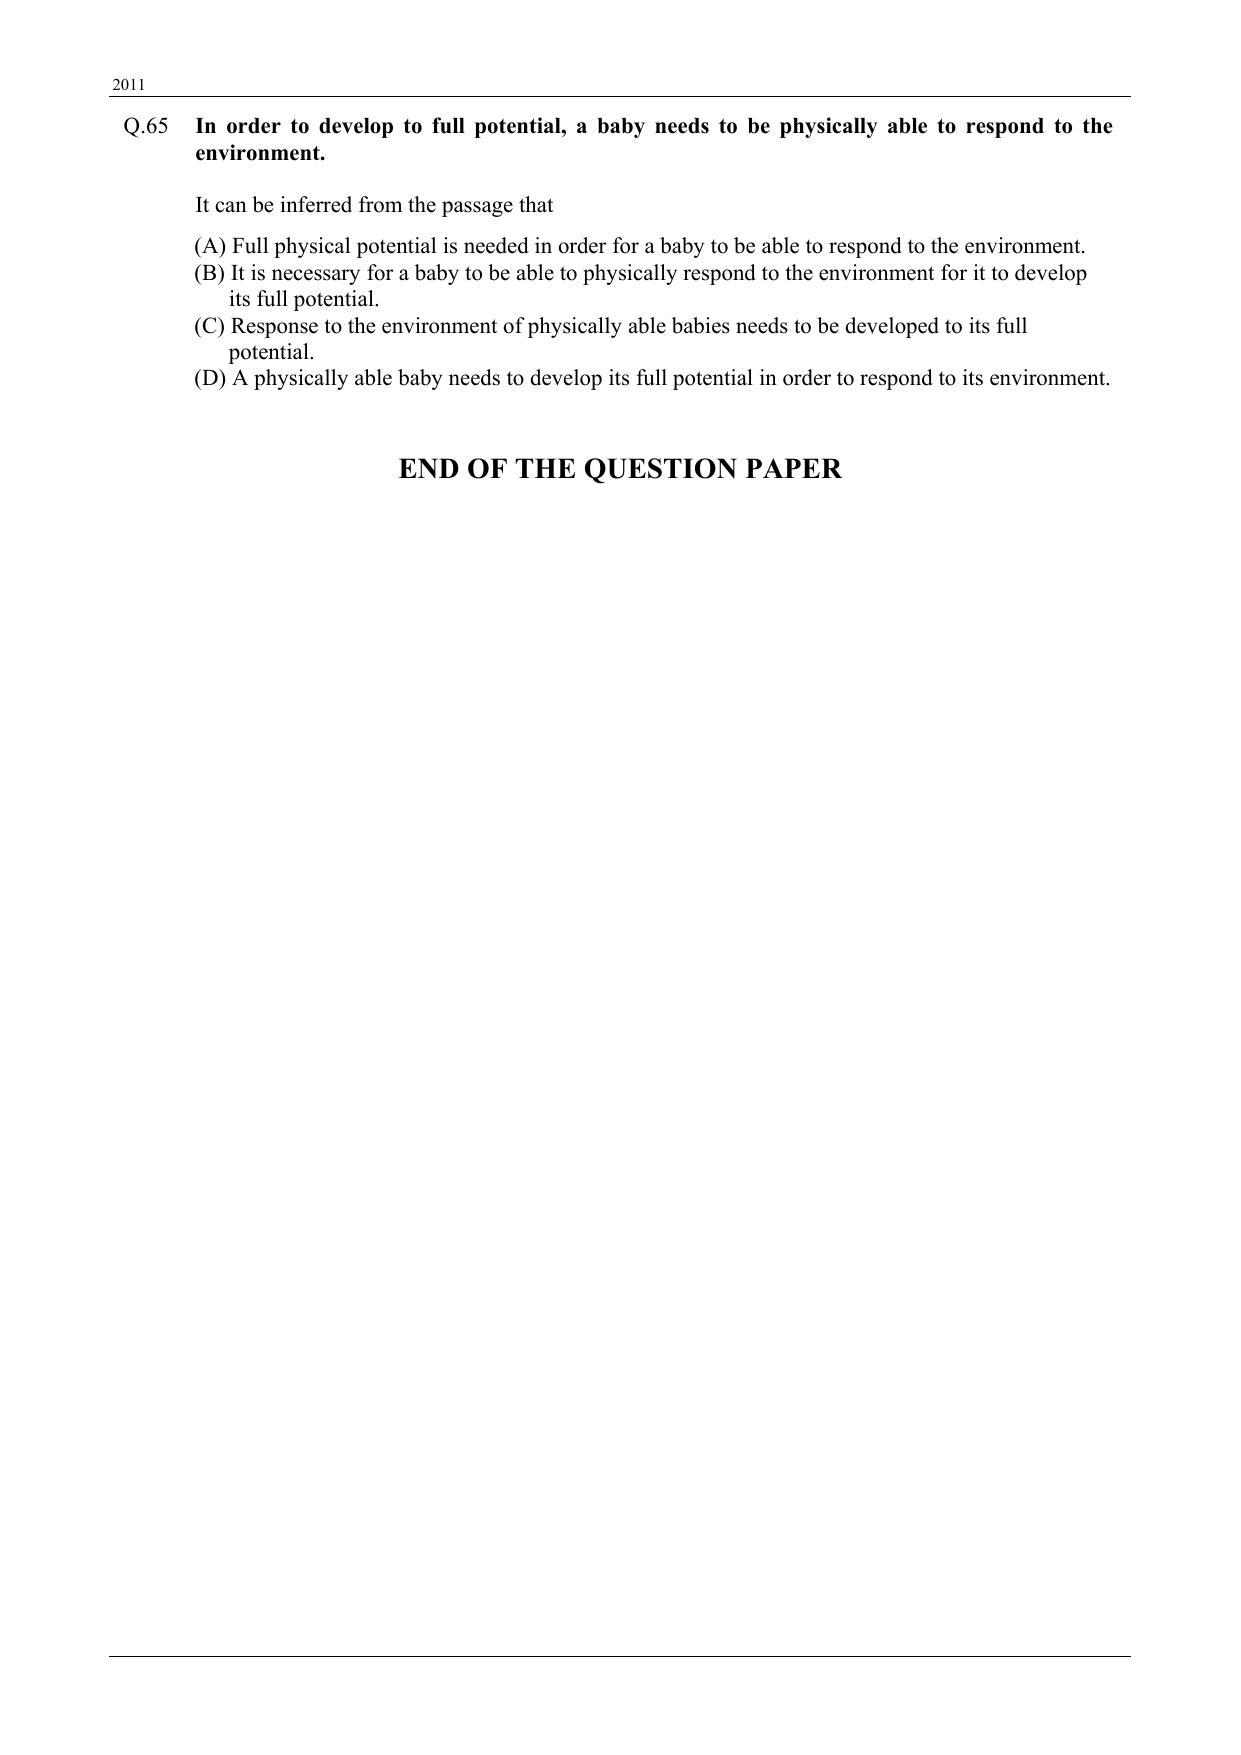 GATE 2011 Textile Engineering and Fibre Science (TF) Question Paper with Answer Key - Page 12